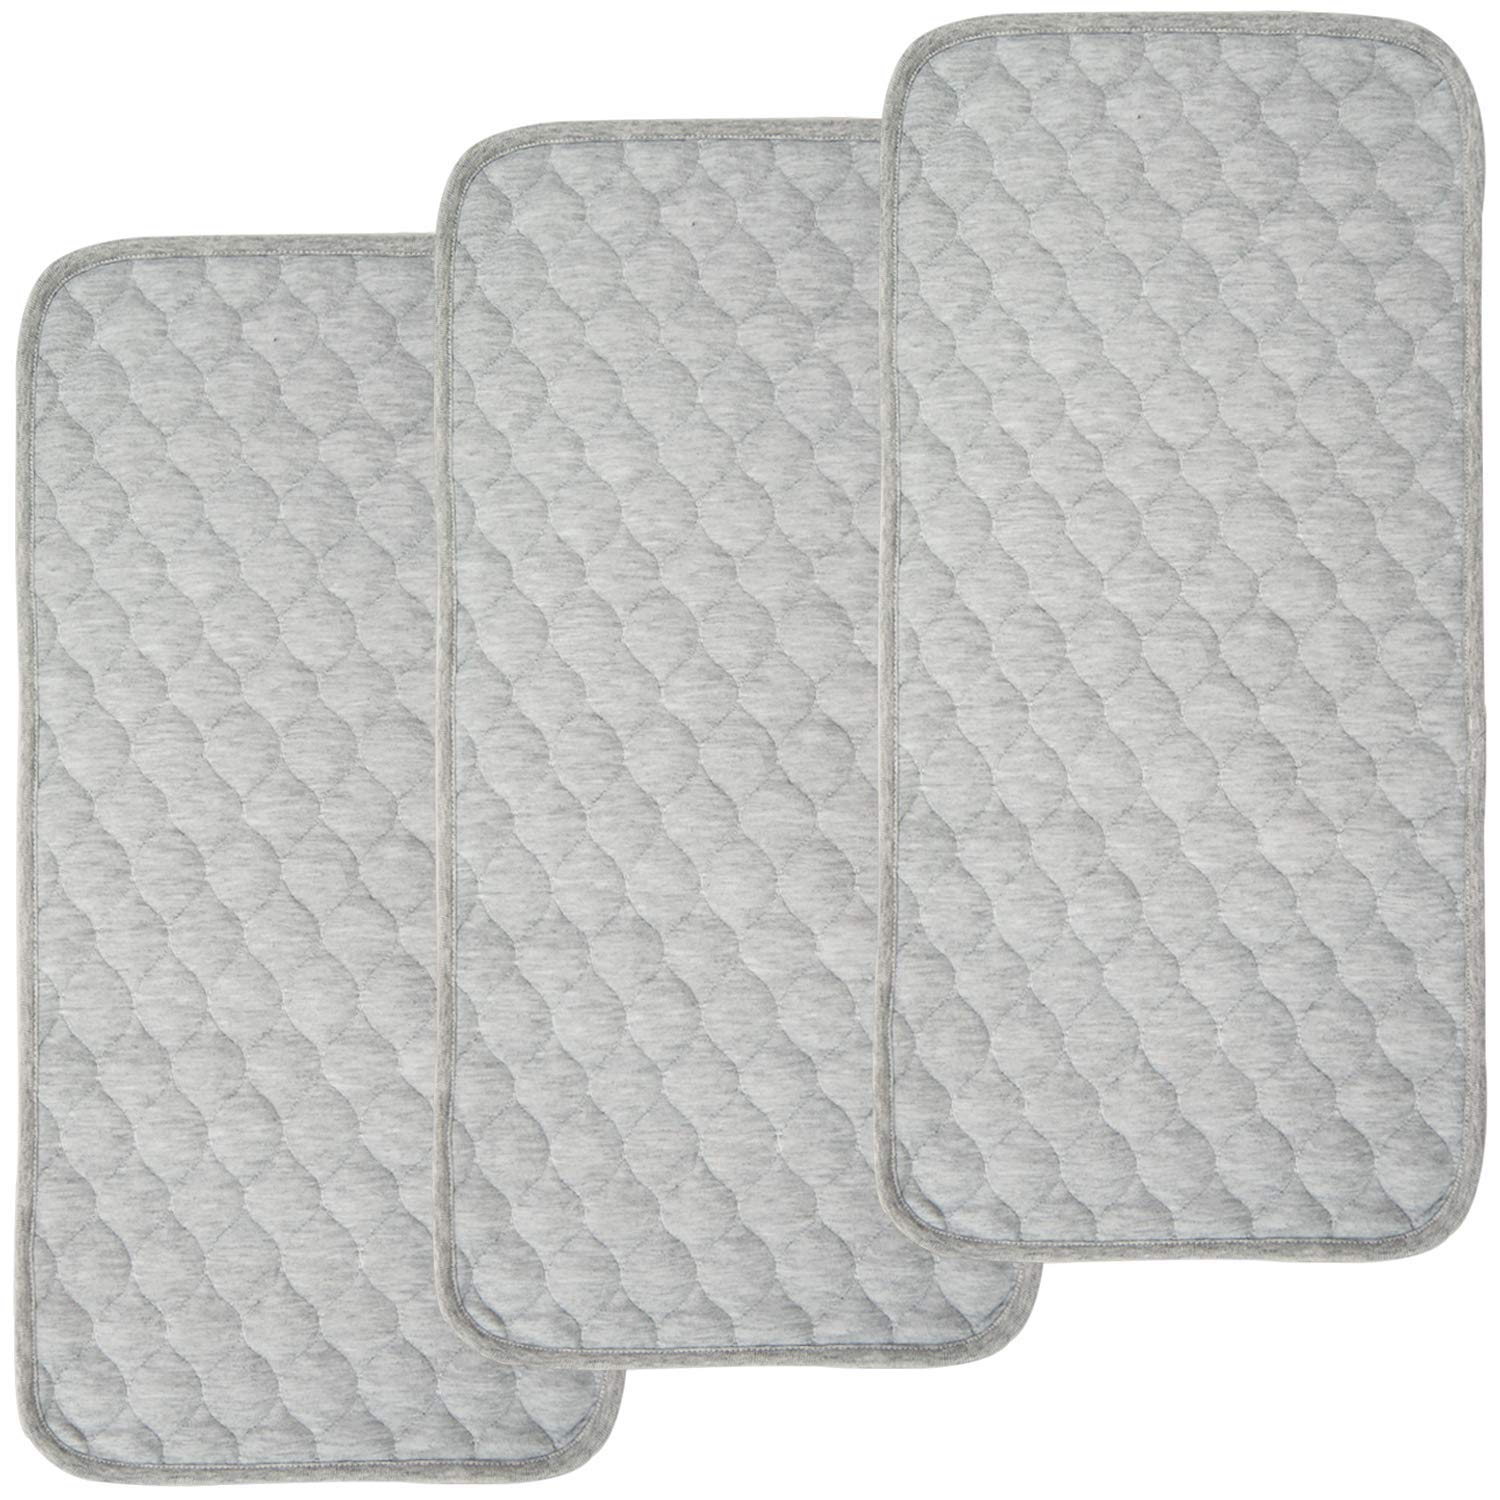 BlueSnail Bamboo Quilted Thicker Waterproof Changing Pad Liners, 3 Count (Gray)